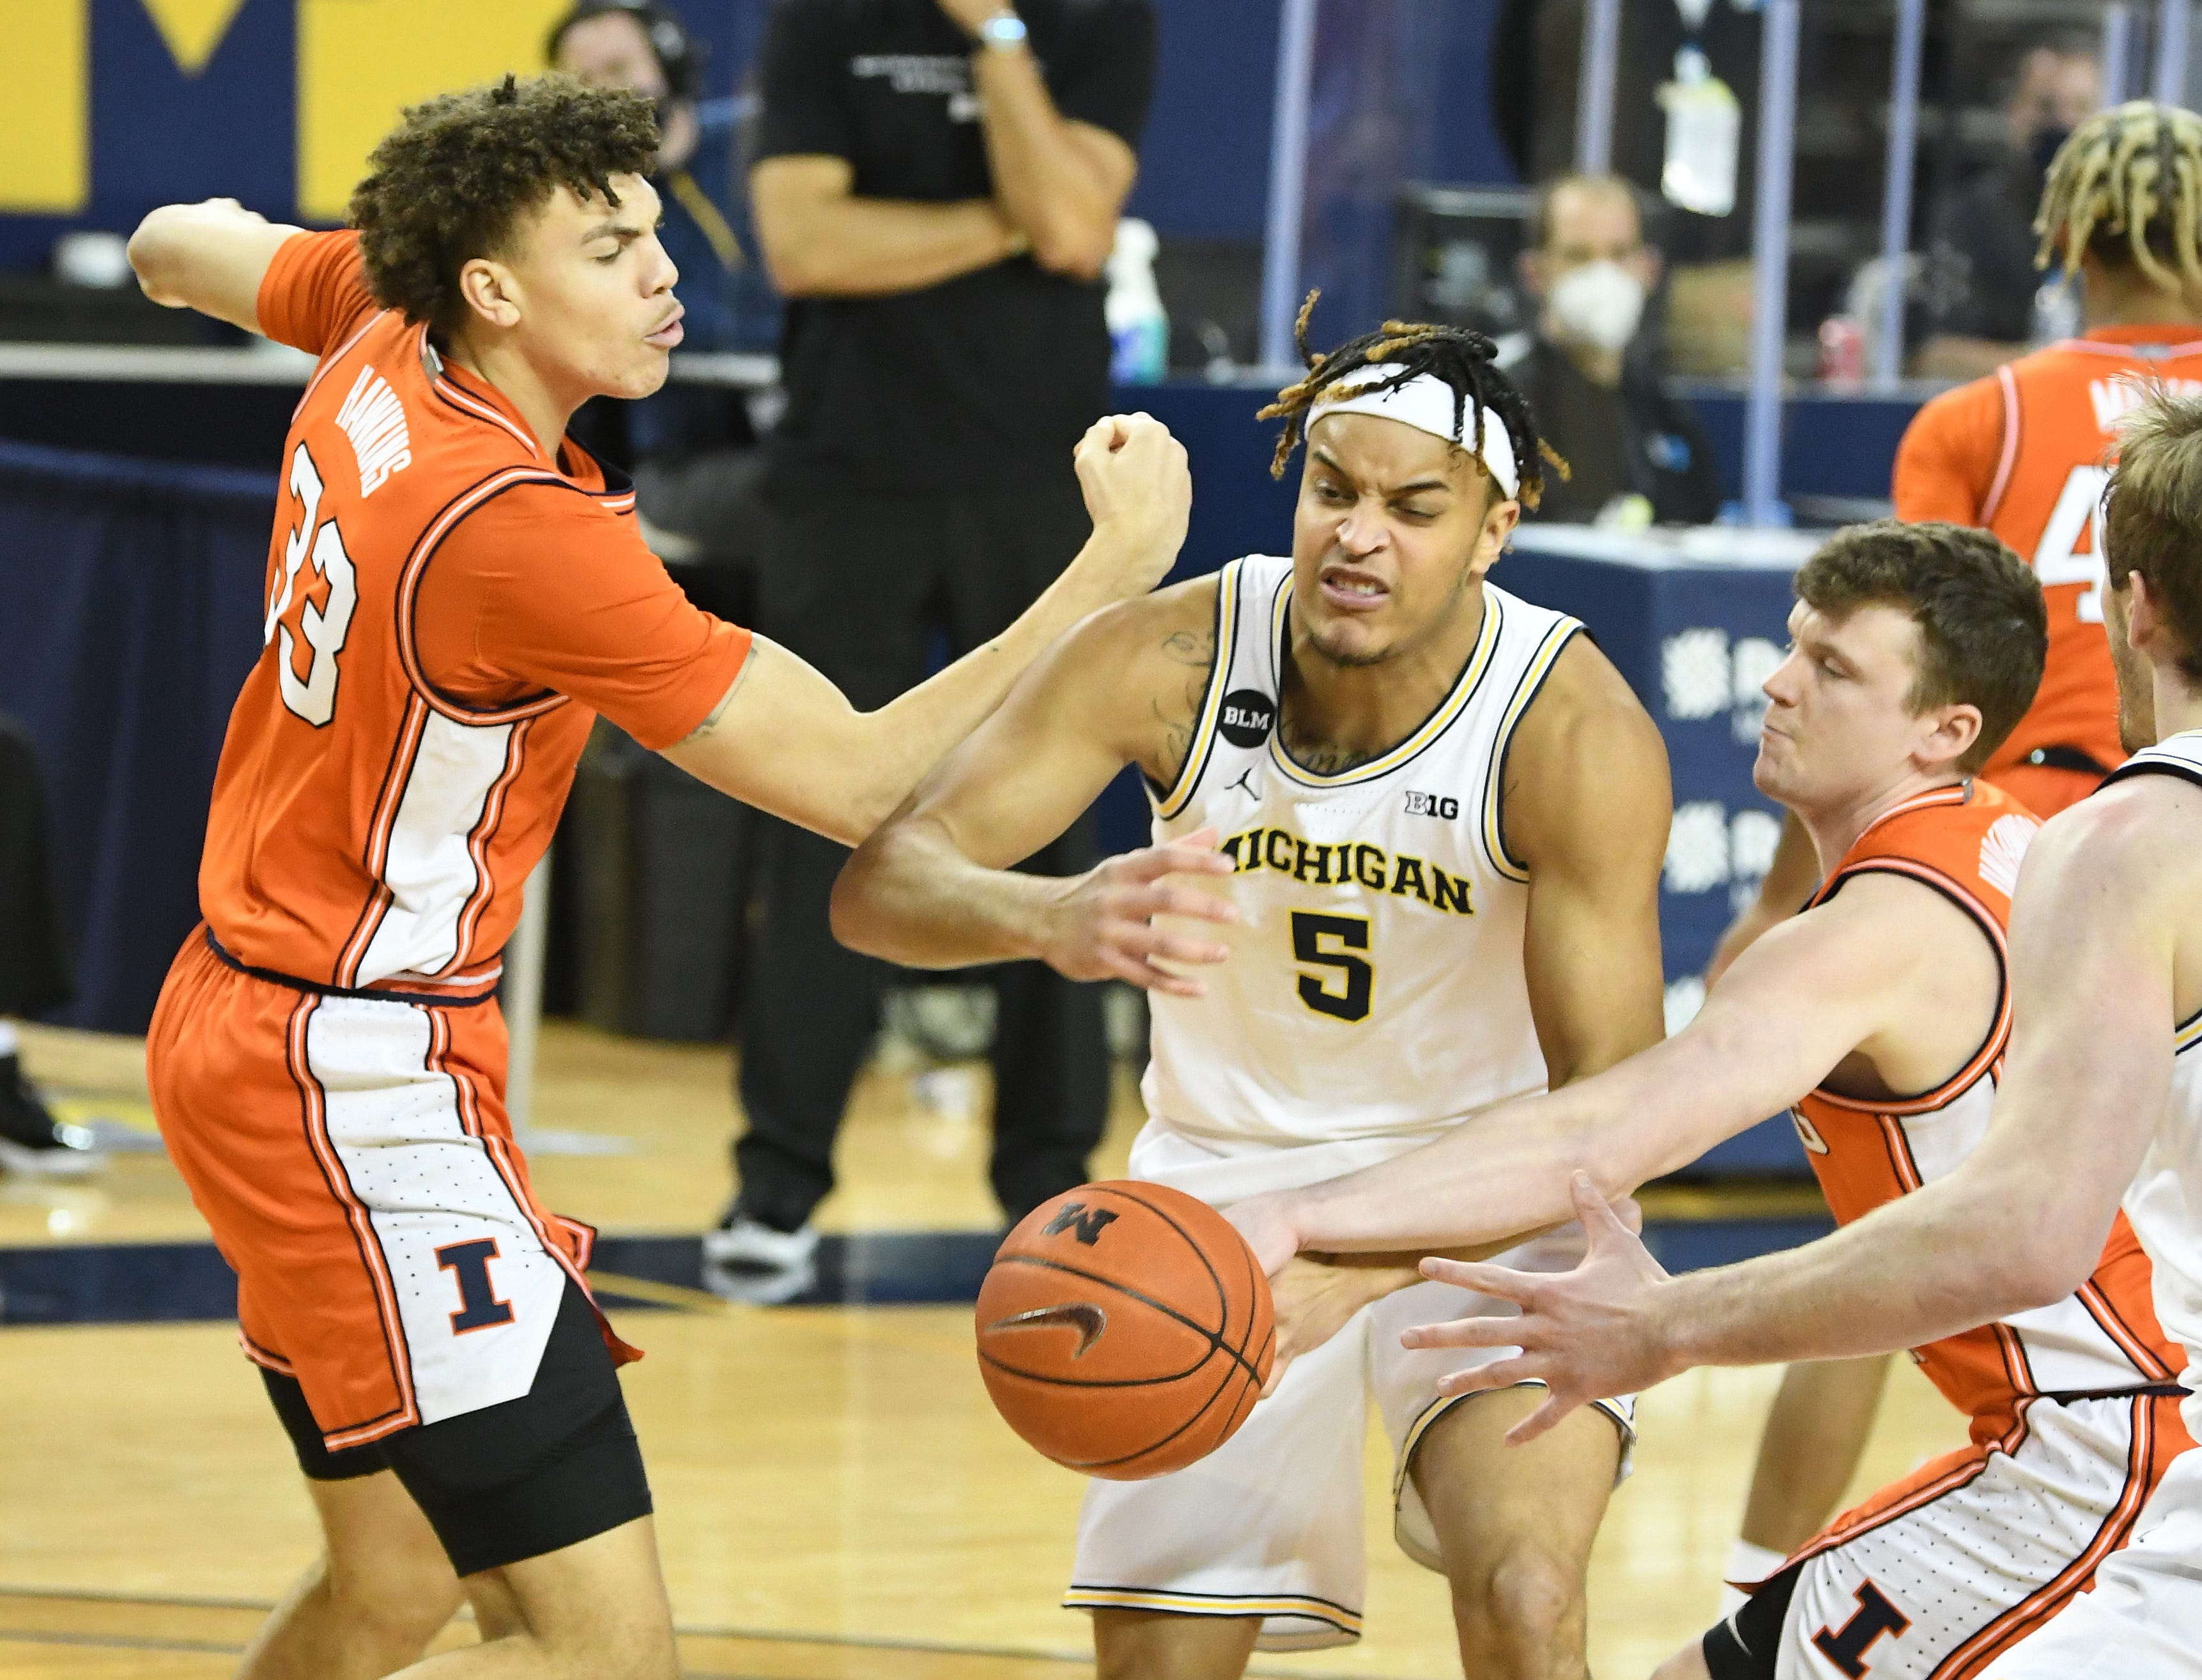 Michigan's Terrance Williams II gets fouled by Illinois' Tyler Underwood late in the second half.